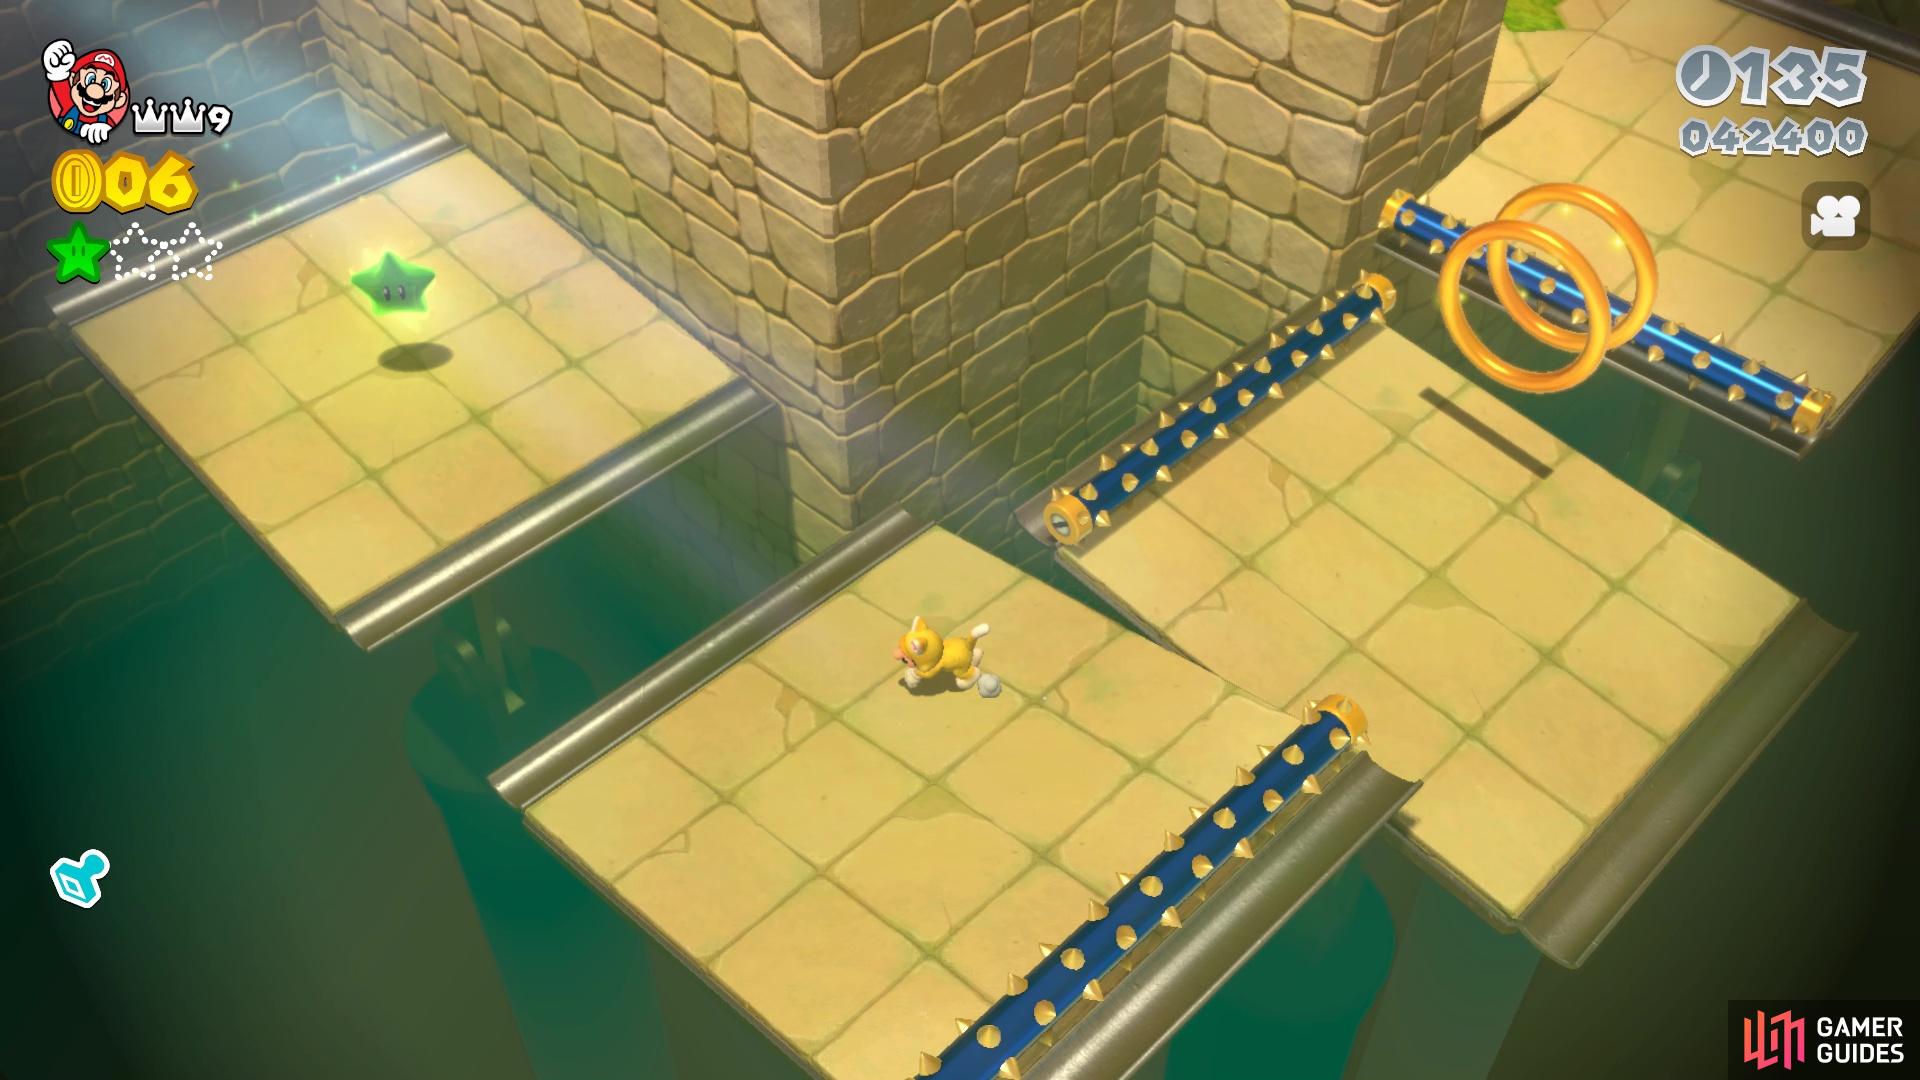 World 4-5 Spike's Lost City - Super Mario 3D World Guide - IGN